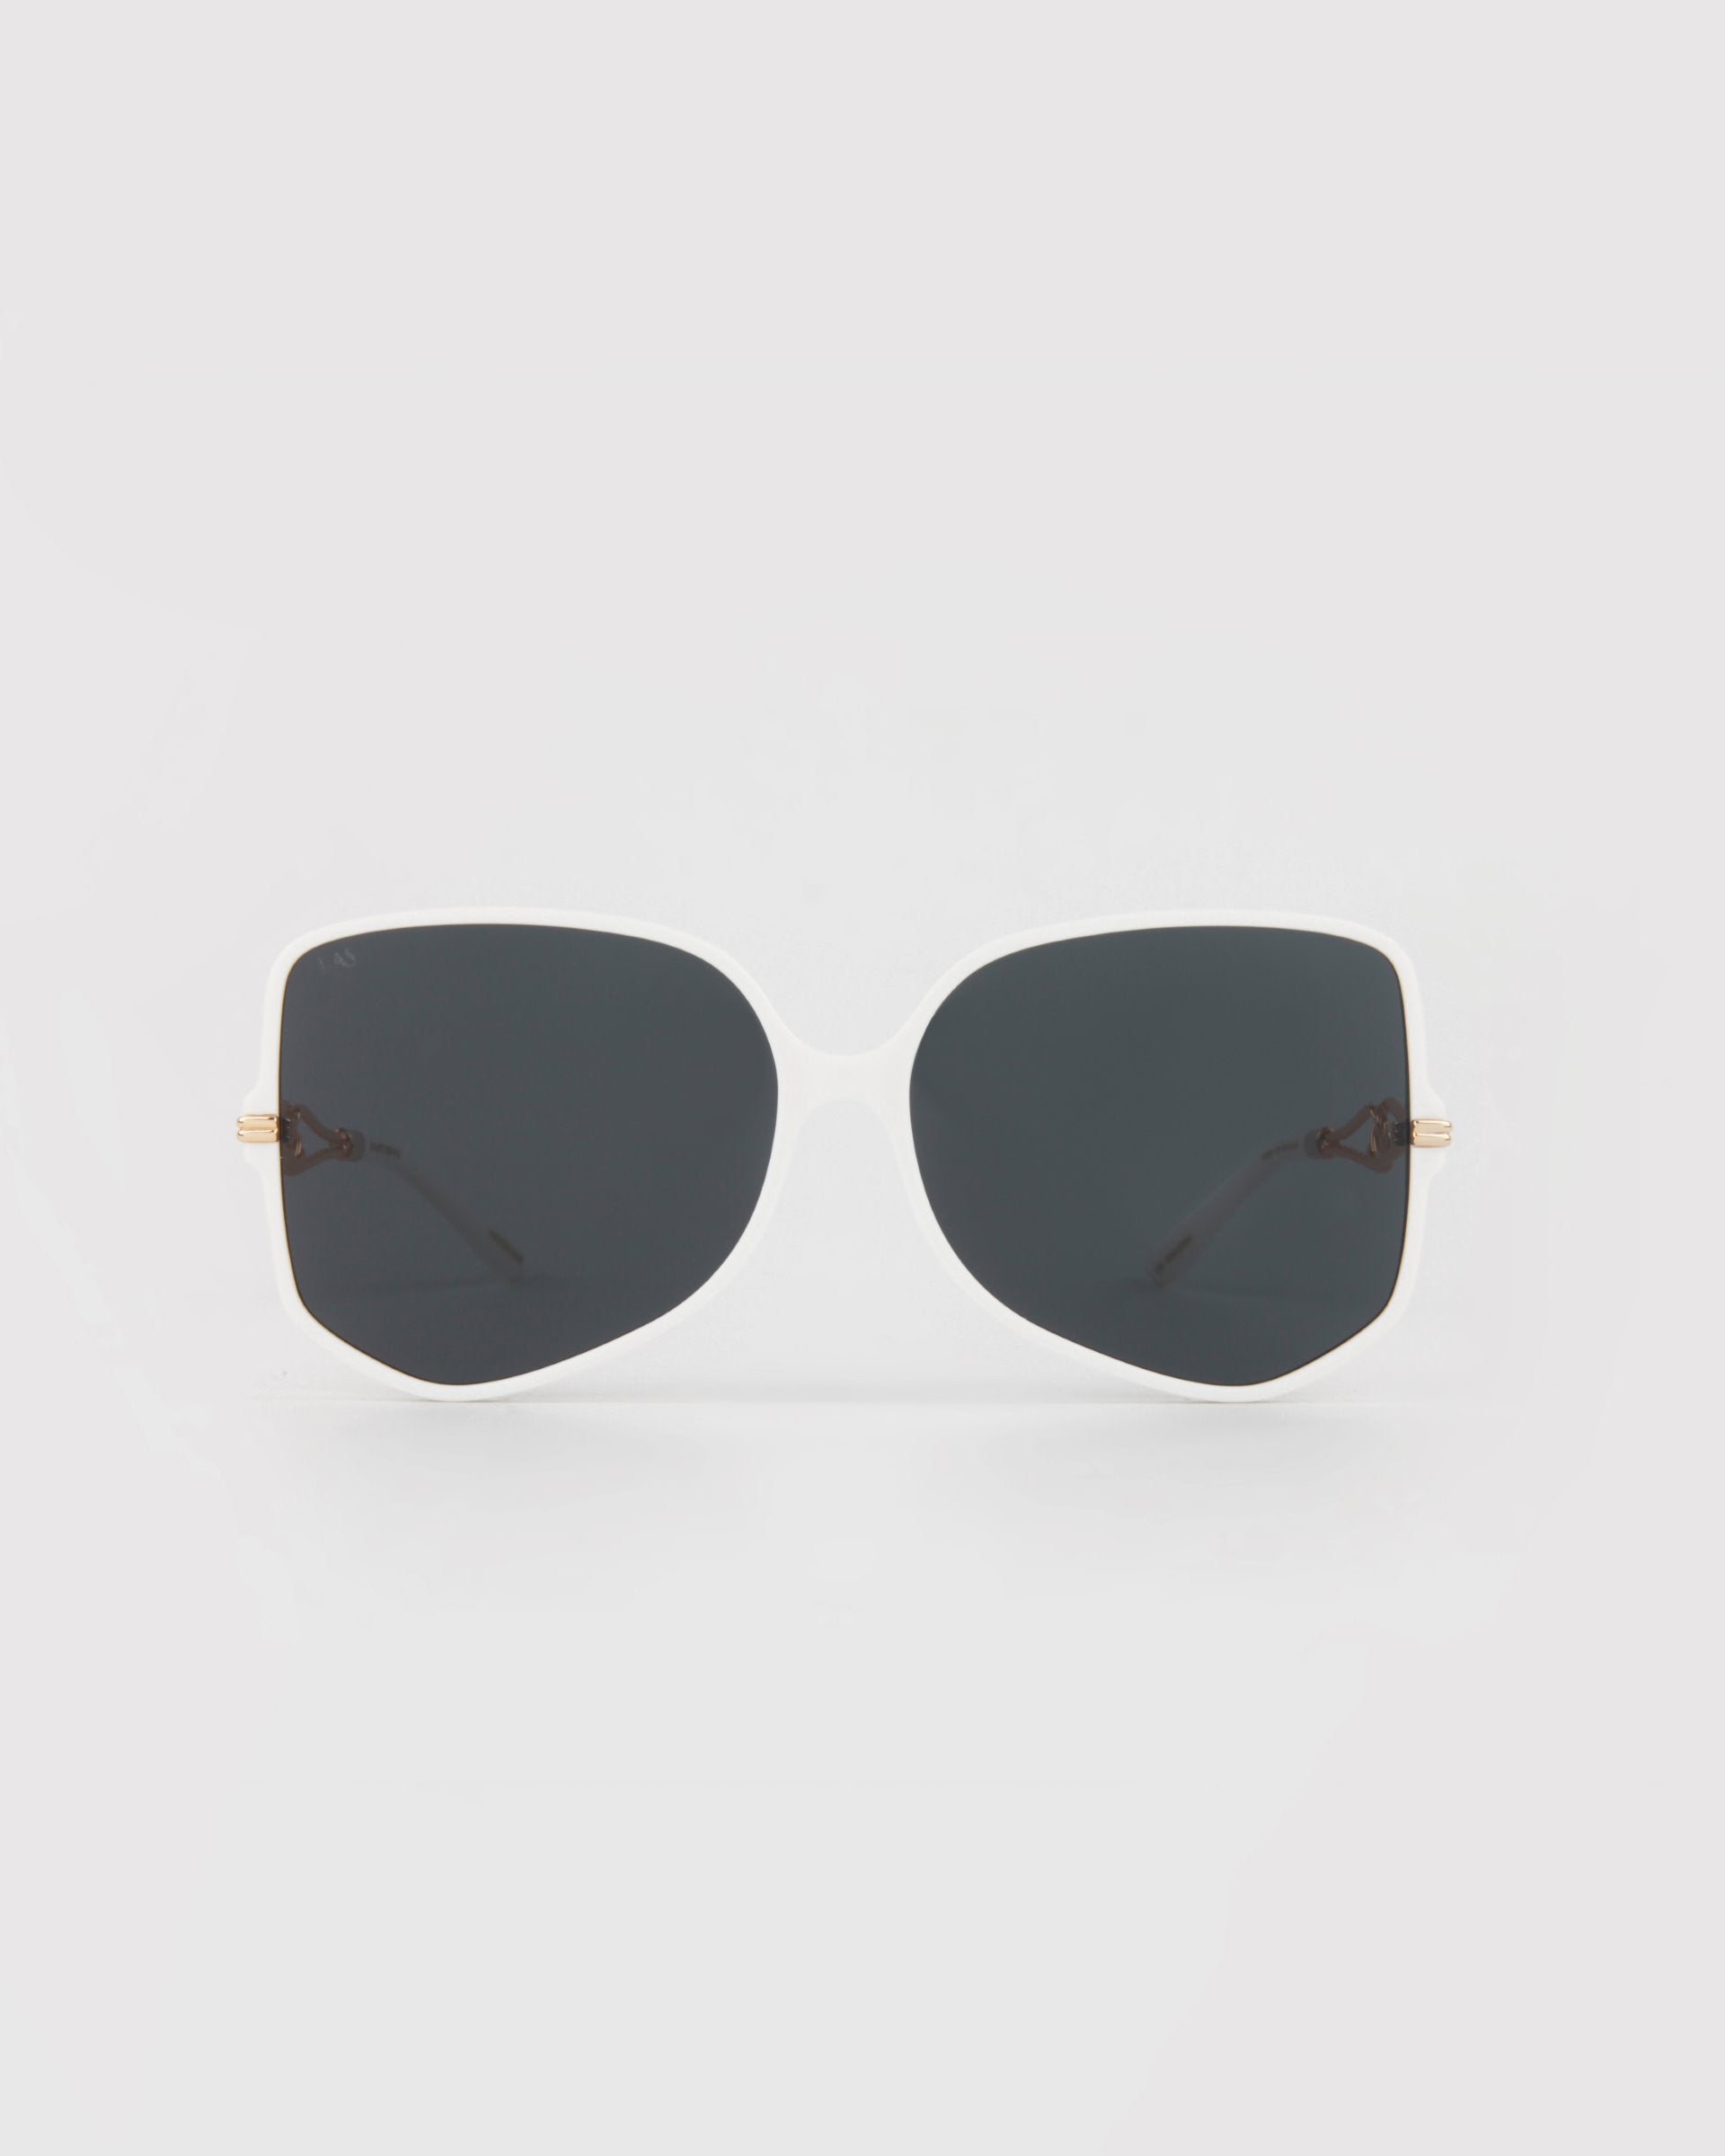 A pair of oversized, square-shaped sunglasses featuring white frames and black lenses. With thin, gold-plated arms and dark-colored temple tips, these minimalistic and modern Voyager by For Art&#39;s Sake® sunglasses offer stylish excellence. Perfectly crafted from handmade acetate eyewear, they provide both UVA &amp; UVB protection.